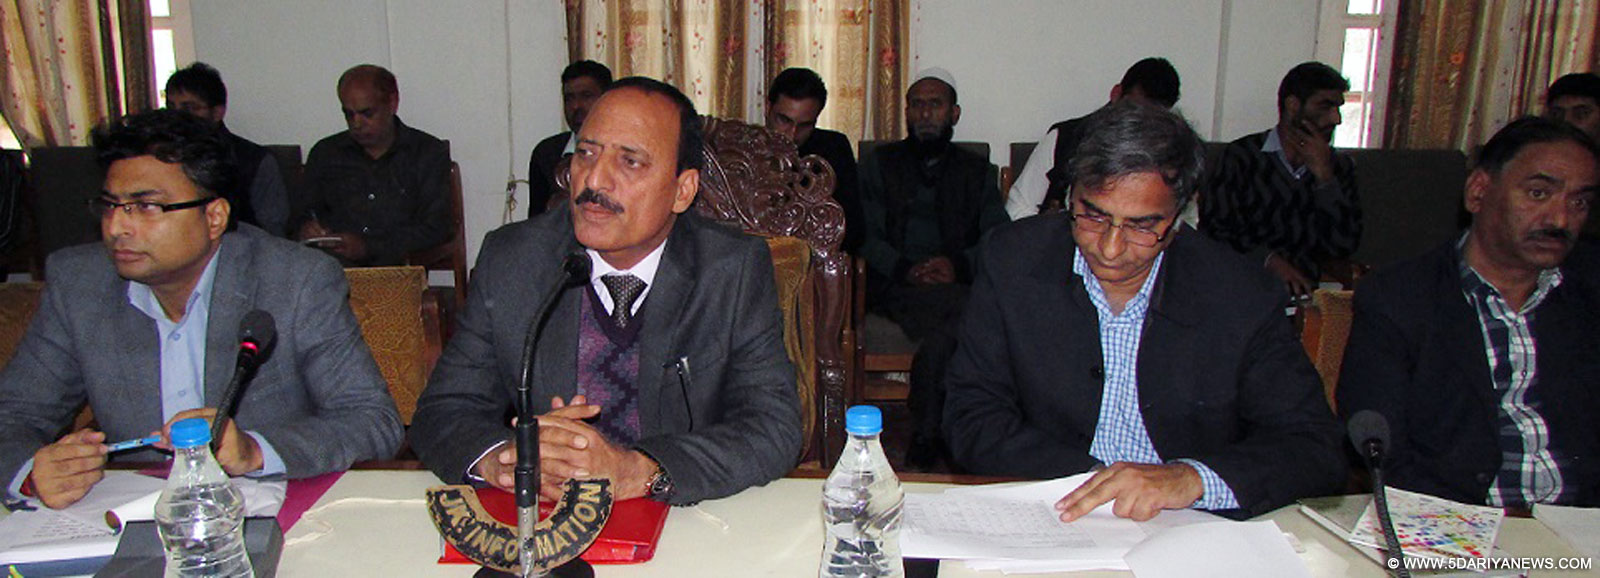 Abdul Haq calls for coordinated effort to retrieve state, grazing land from encroachers